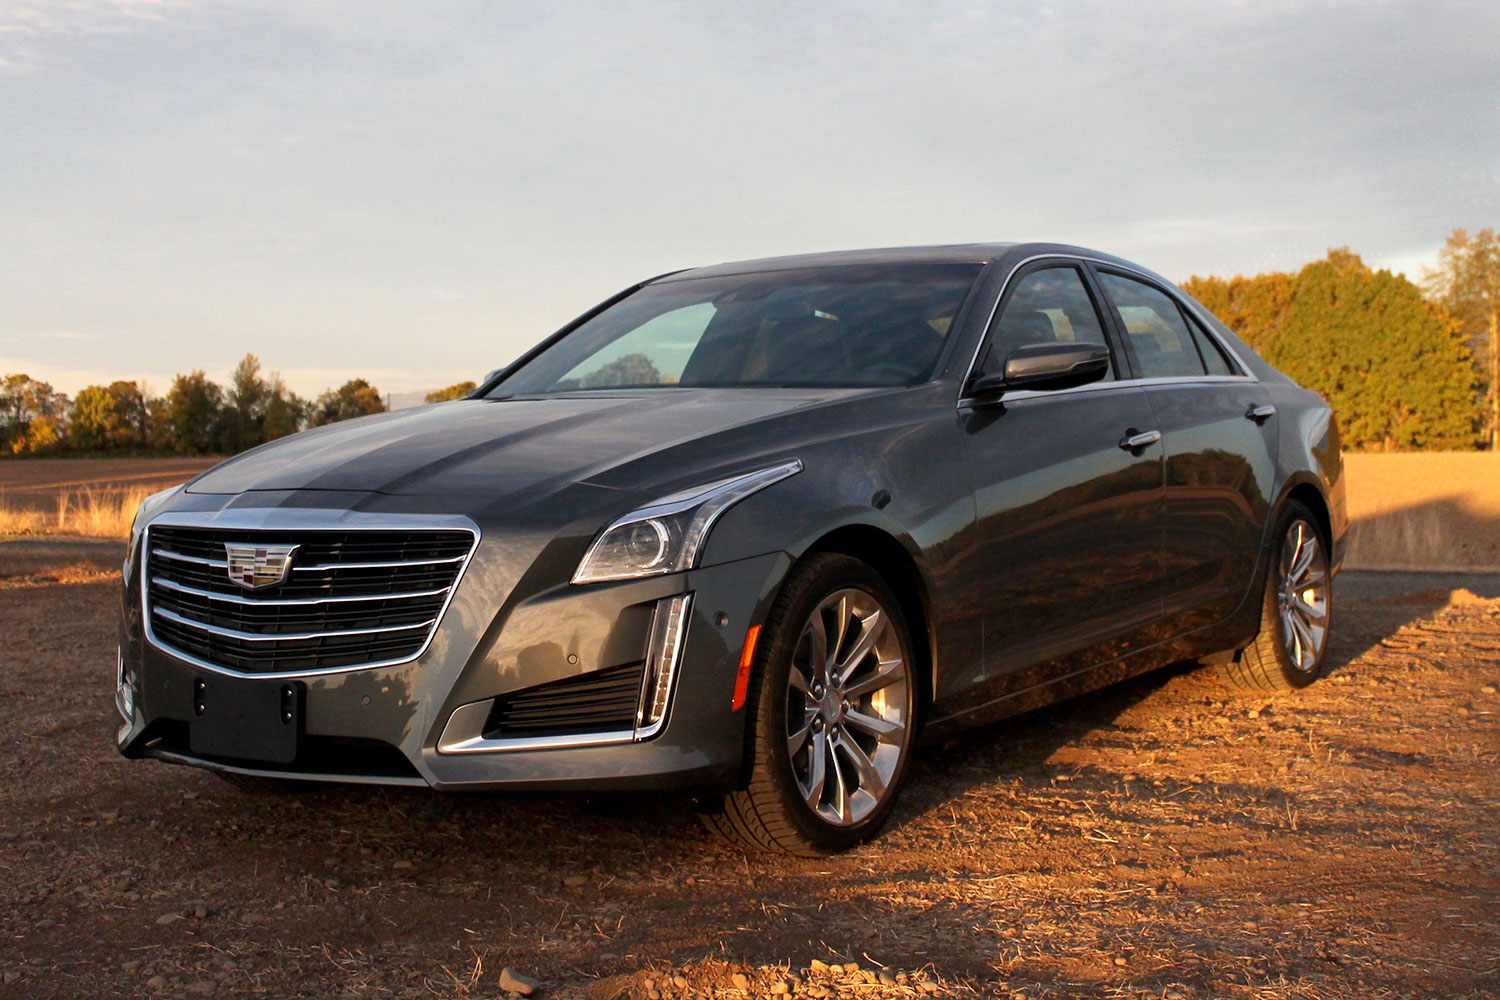 2016 Cadillac CTS Review | Digital Trends